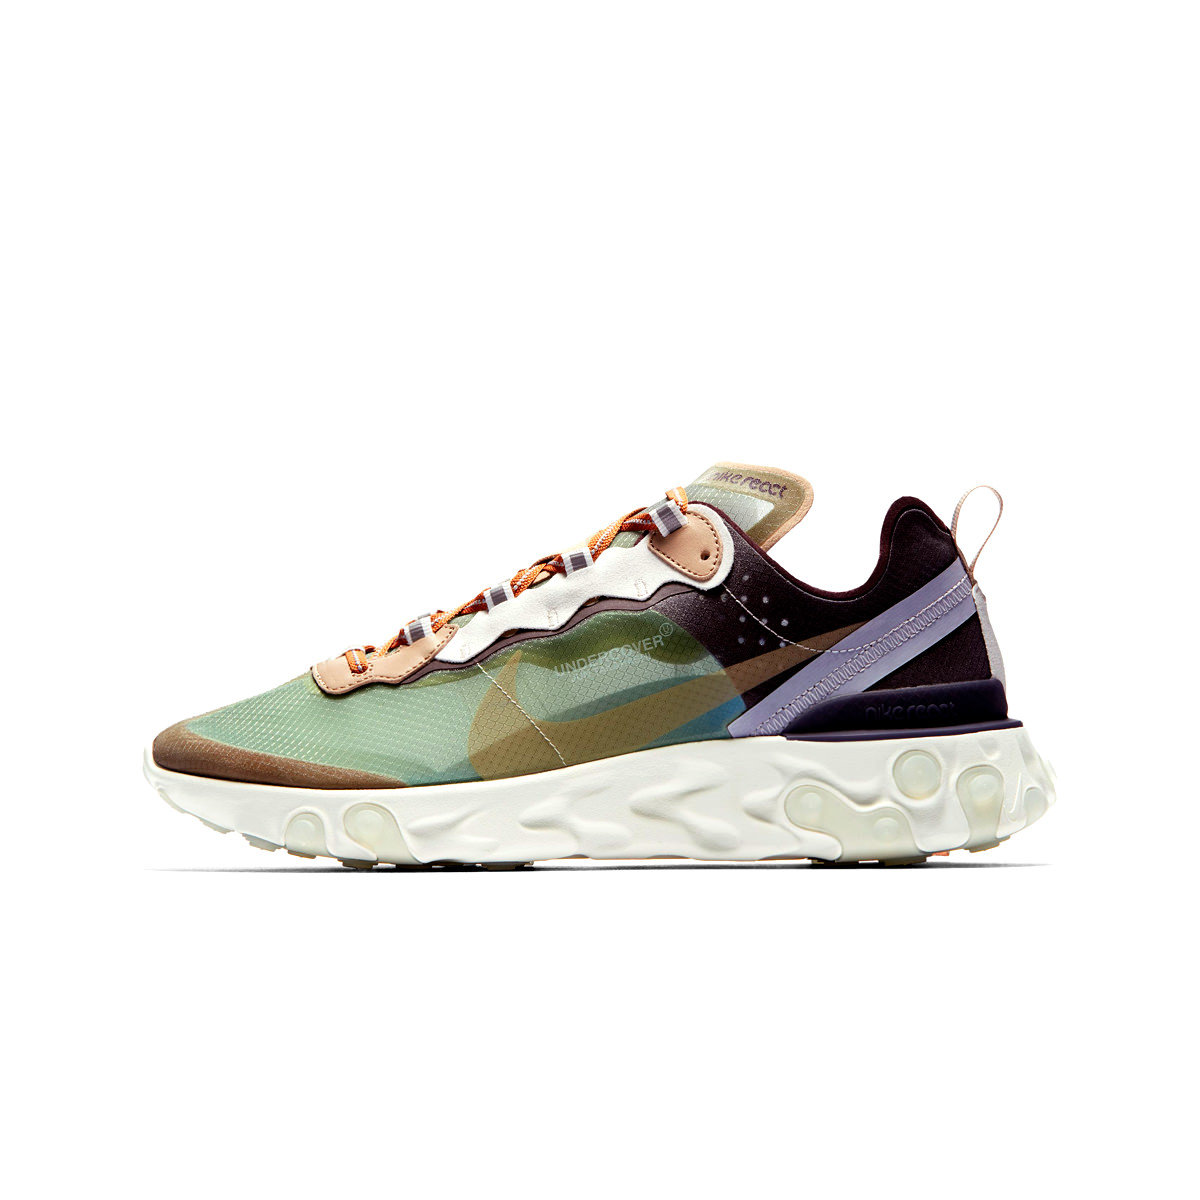 Nike React Element 87 Undercover Green 